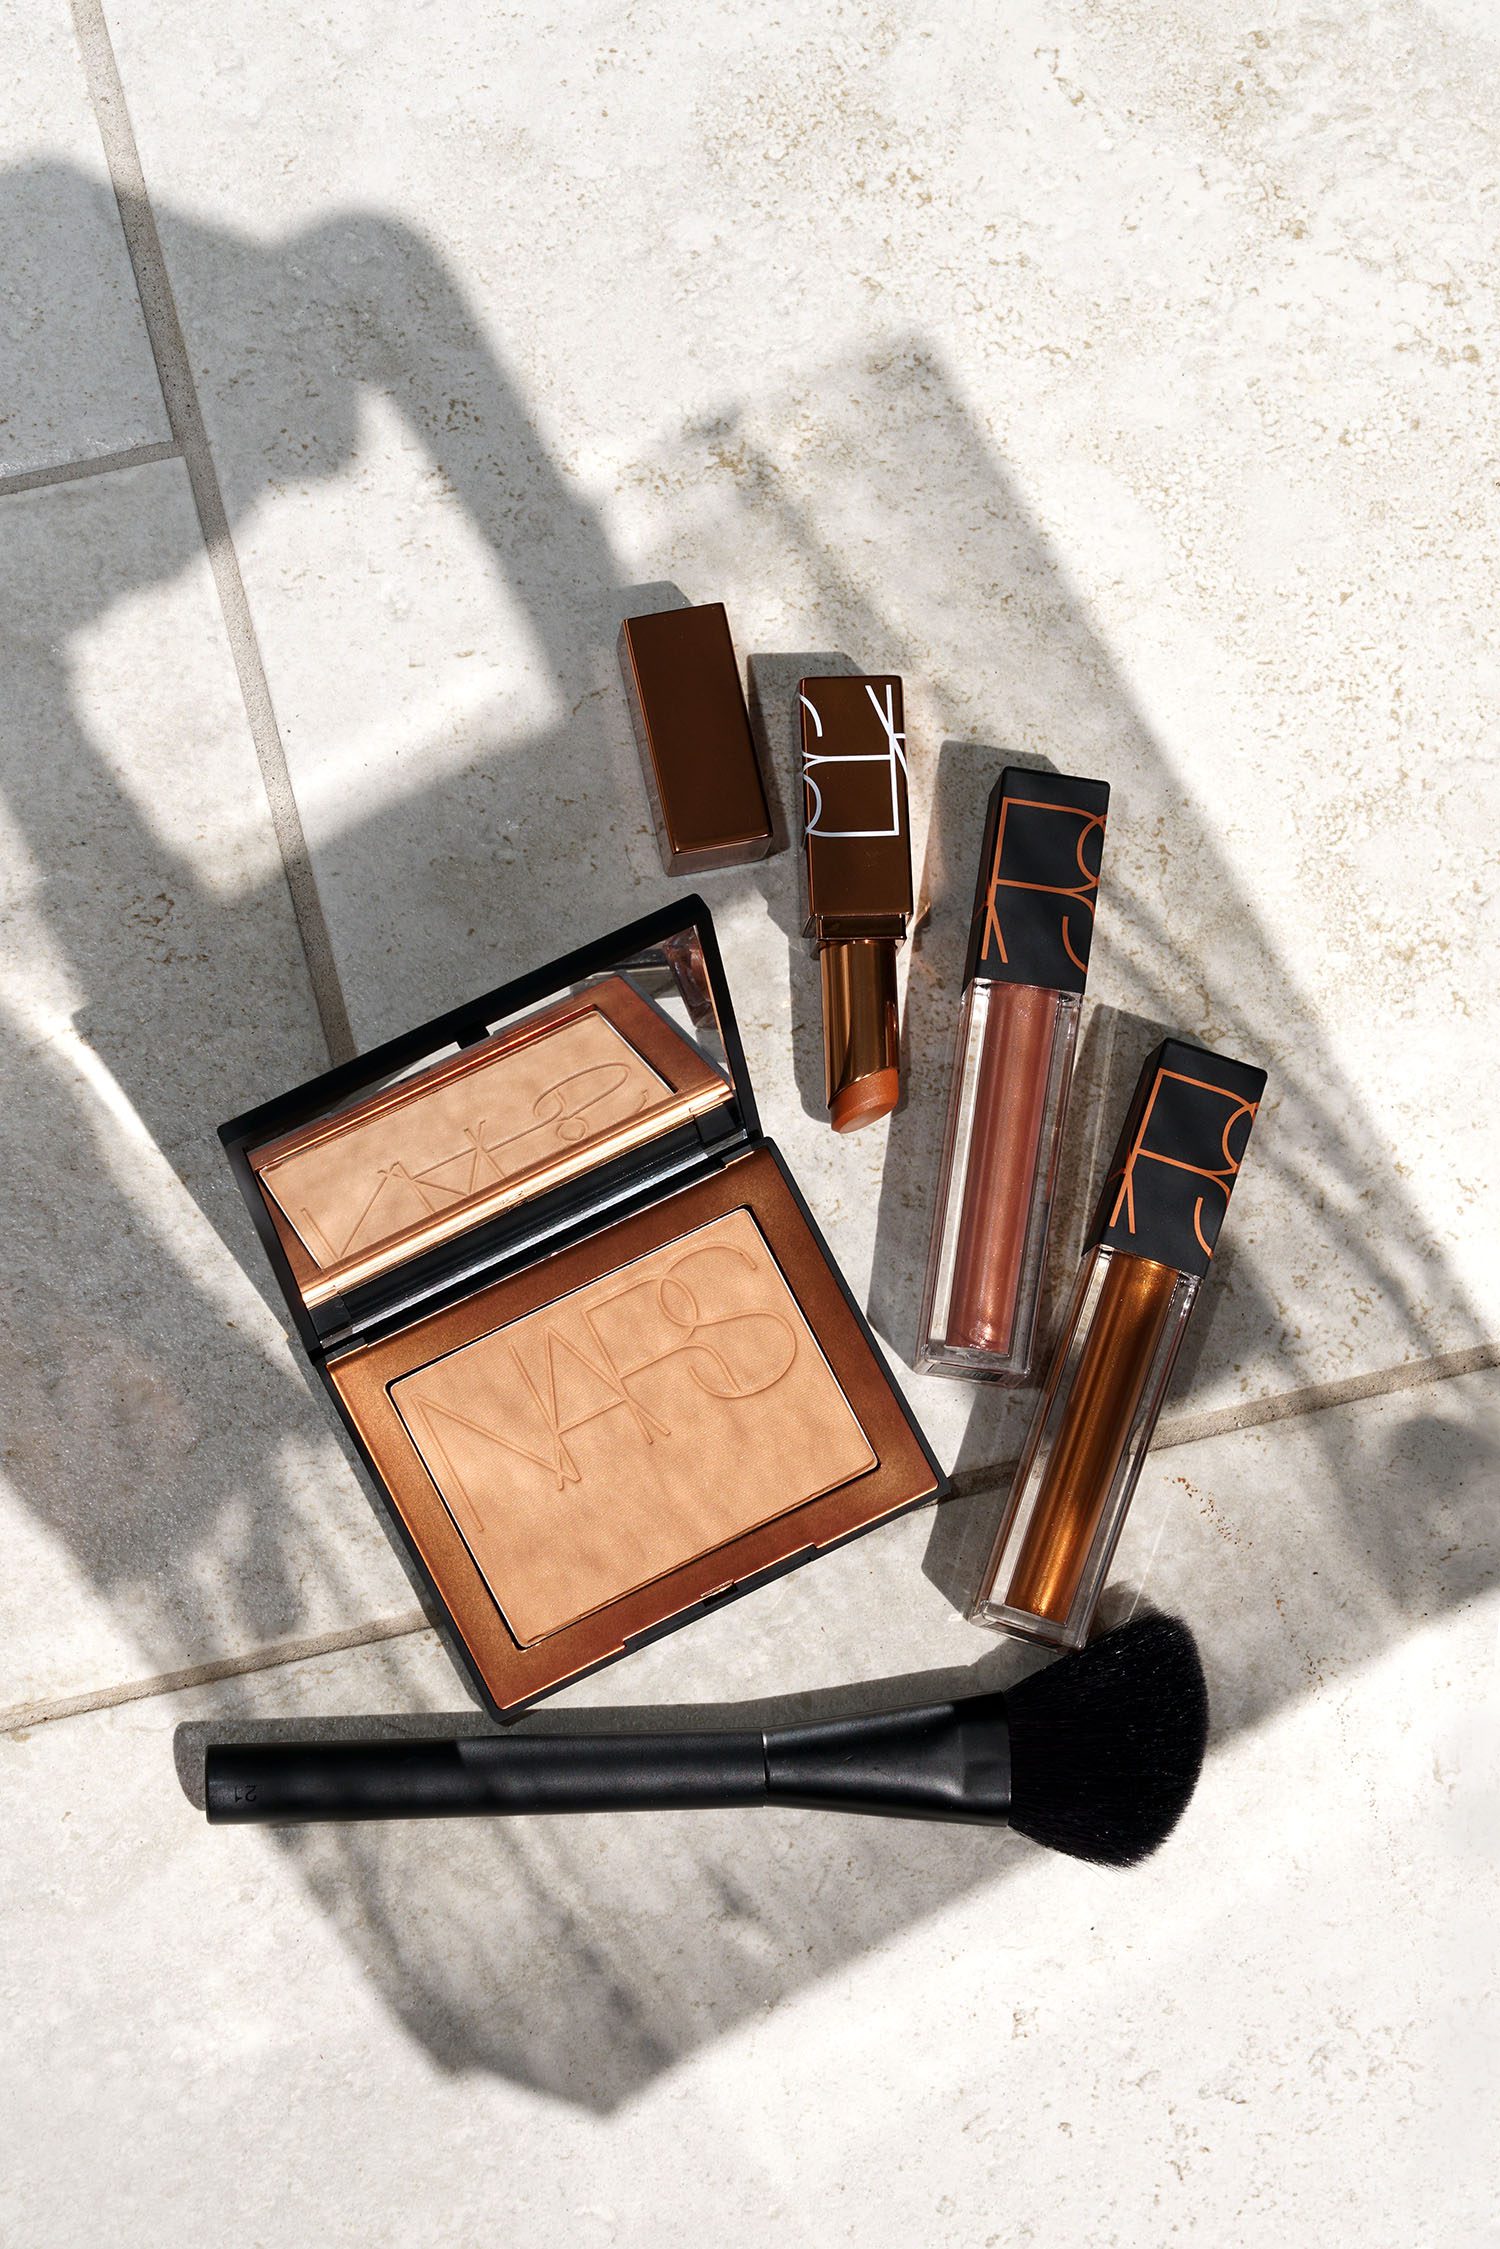 Nordstrom Anniversary Sale 2021 Beauty Haul - The Beauty Look Book